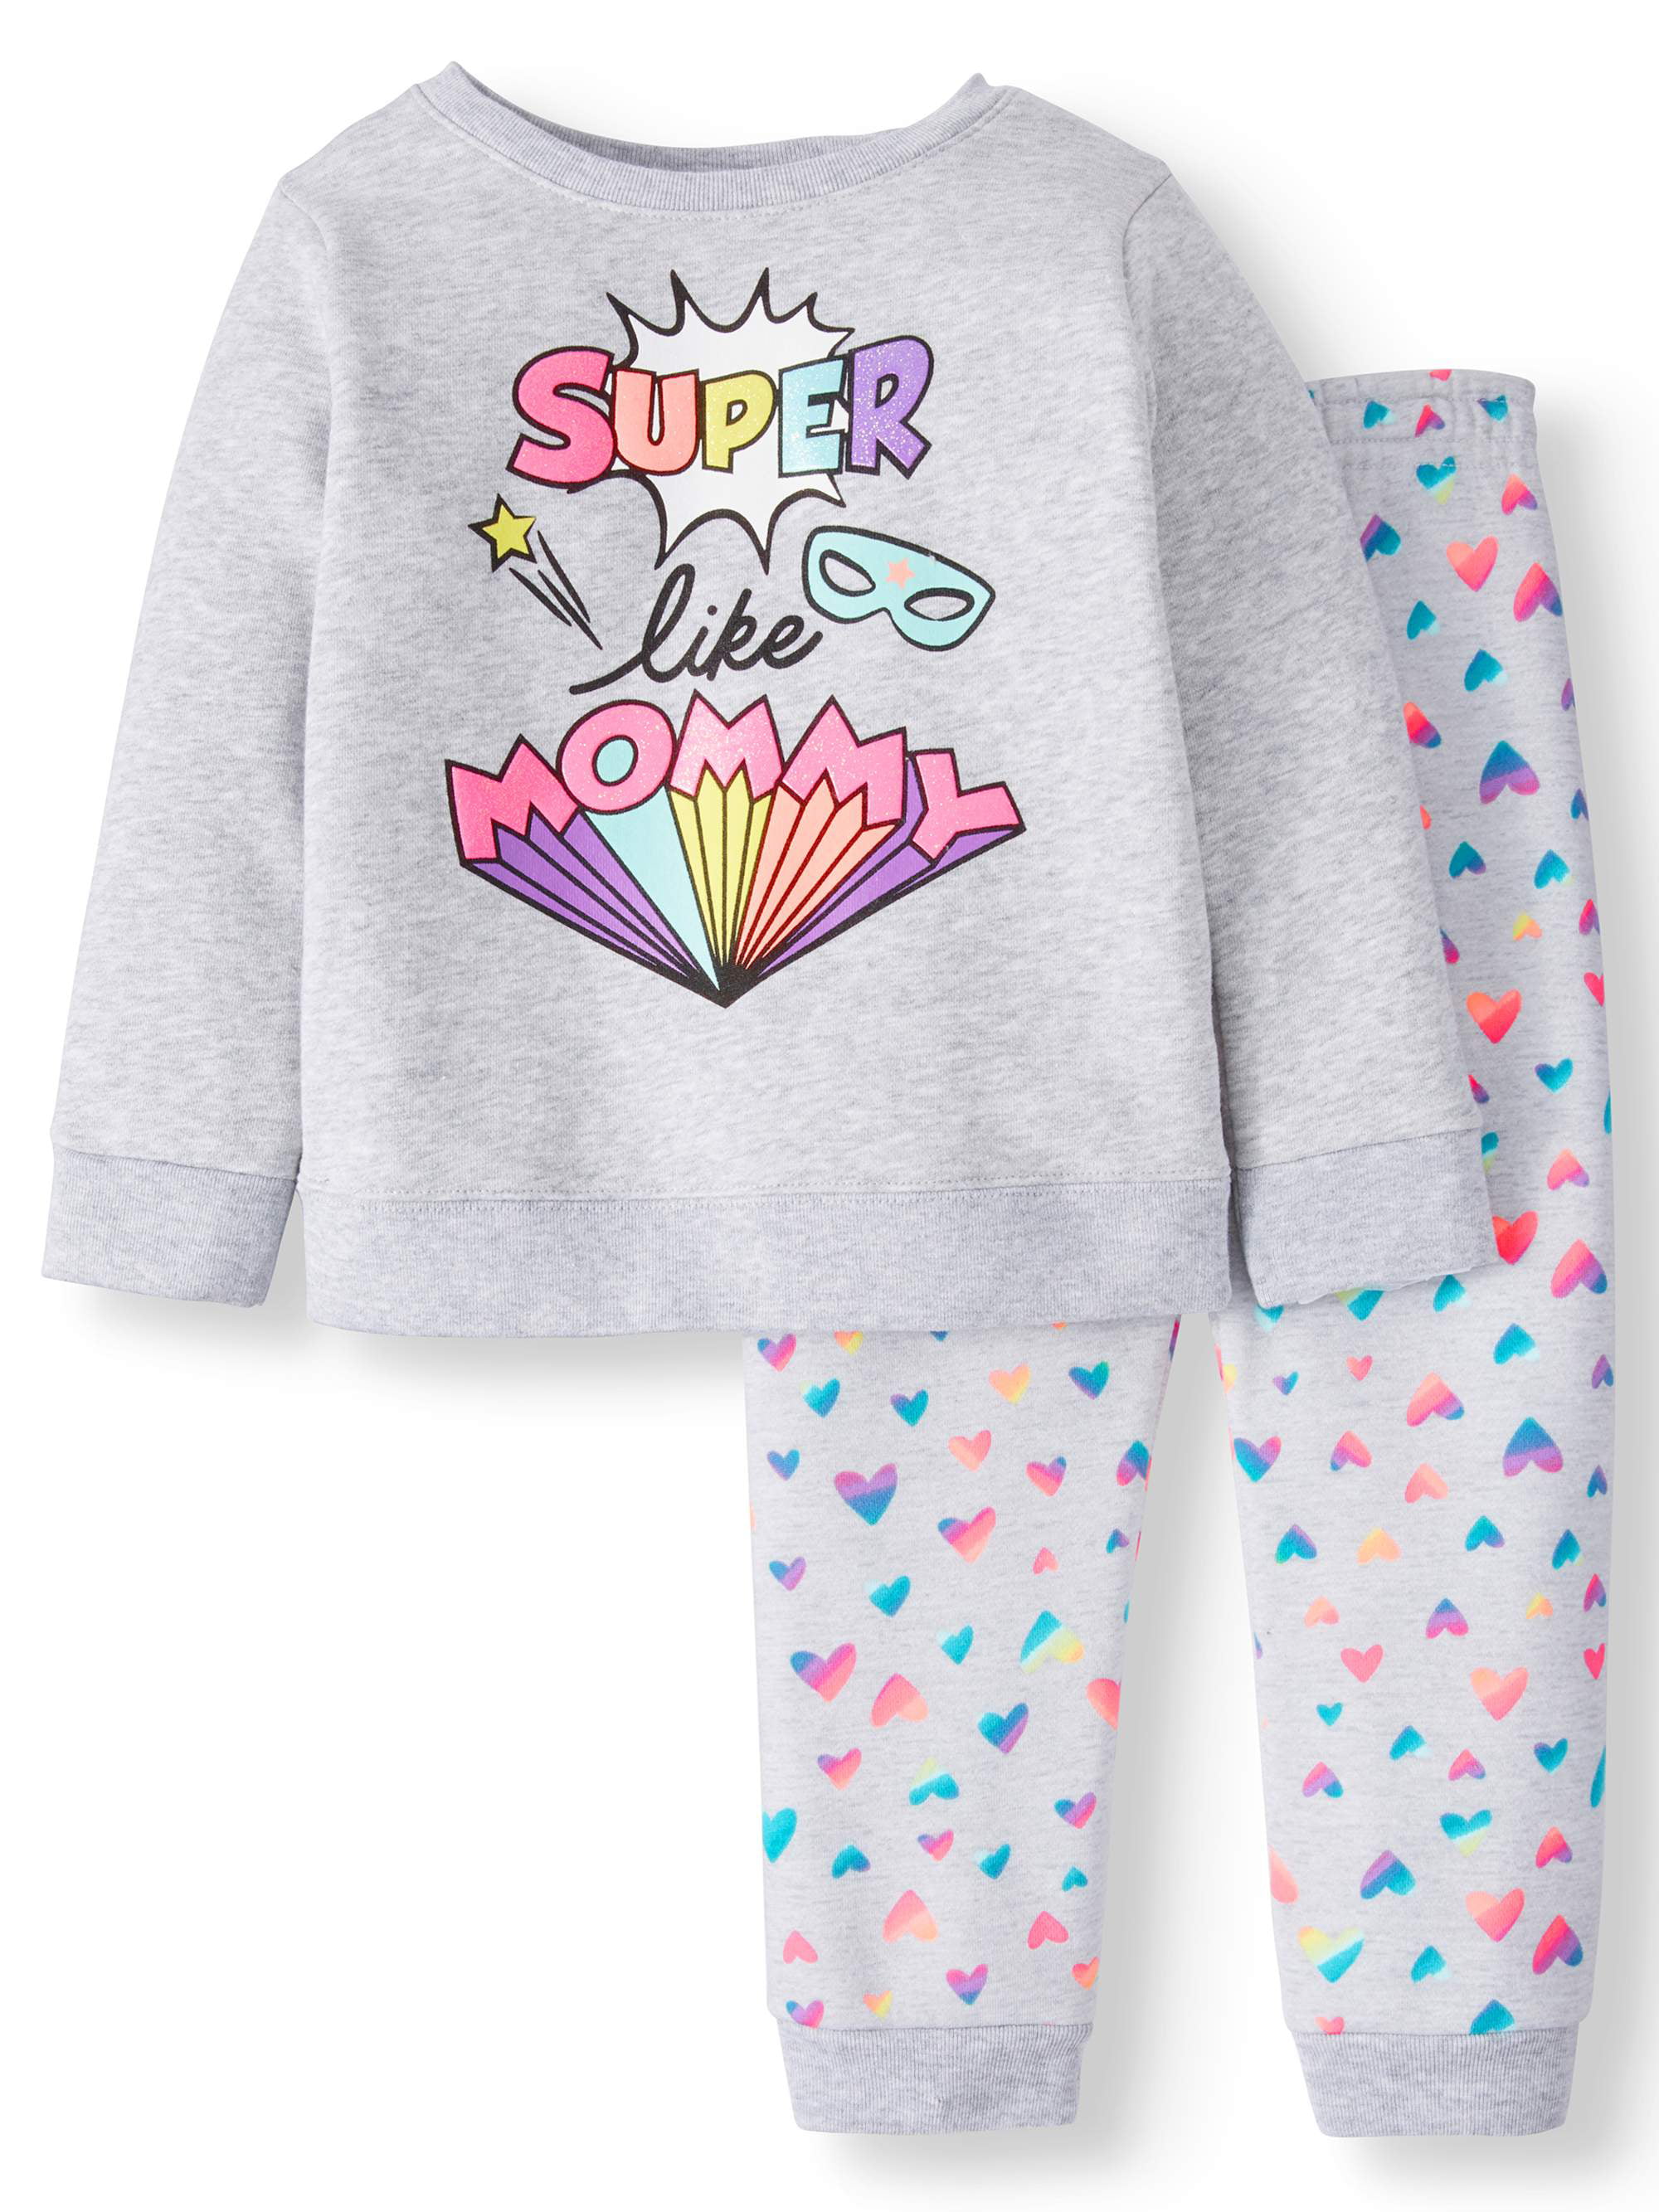 Toddler Girls Outfit GRAY SWEATSHIRT & SWEATPANTS Rainbow Letters LOVE Hearts 3T